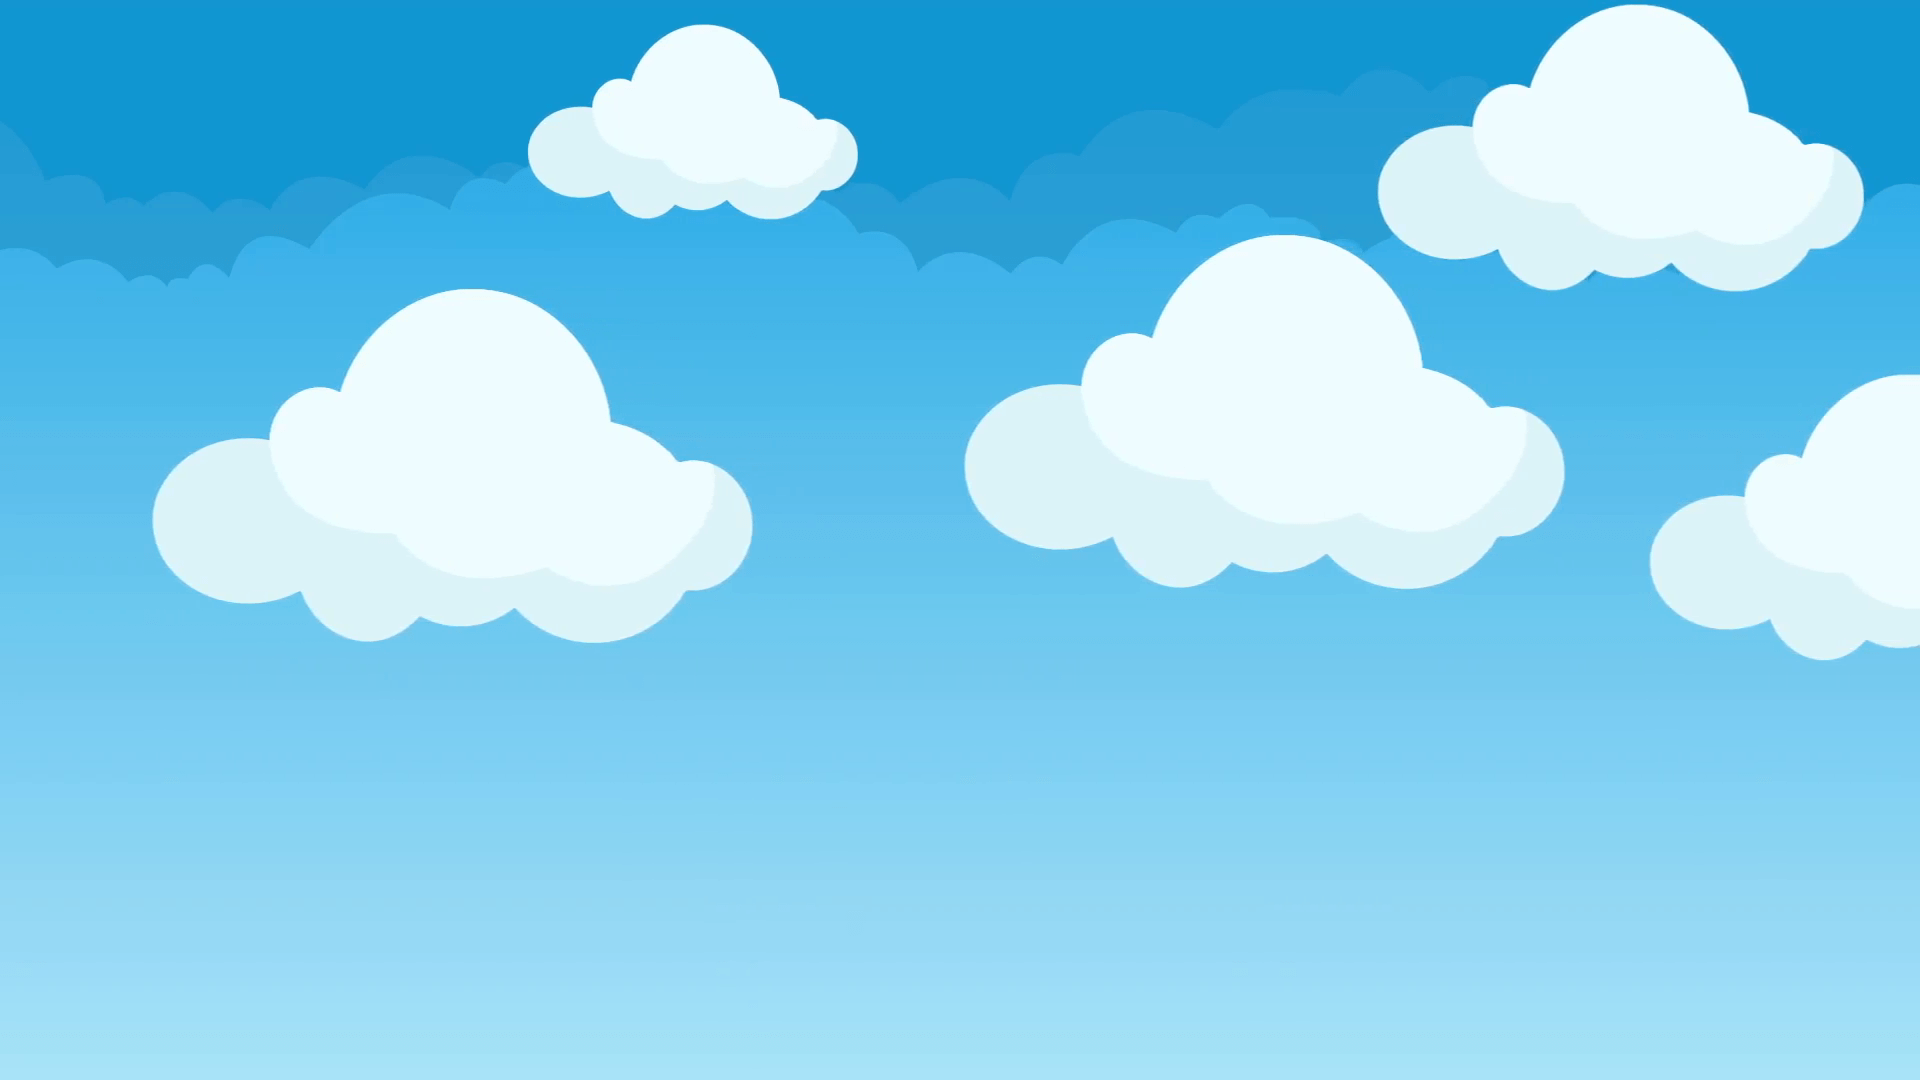 Cartoon Clouds Backround Choose From Over A Million Free Vectors